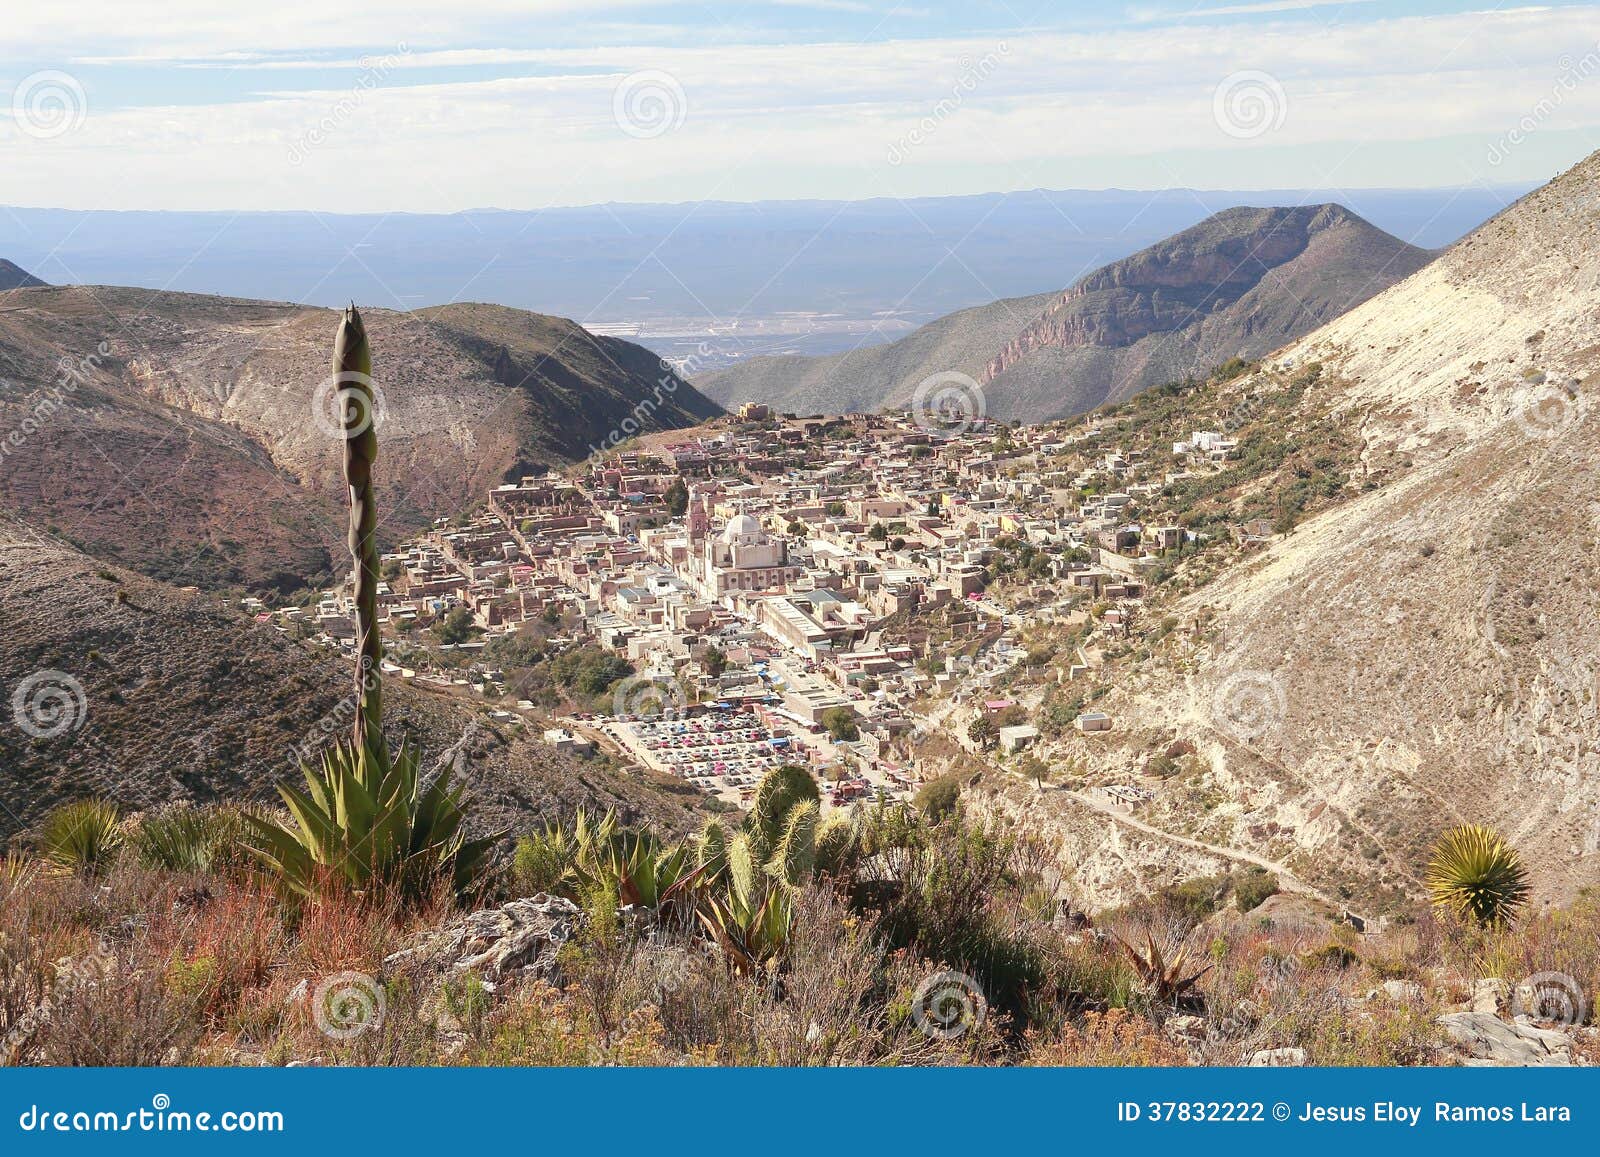 mountains and aerial view of real de catorce, san luis potosi, mexico ii